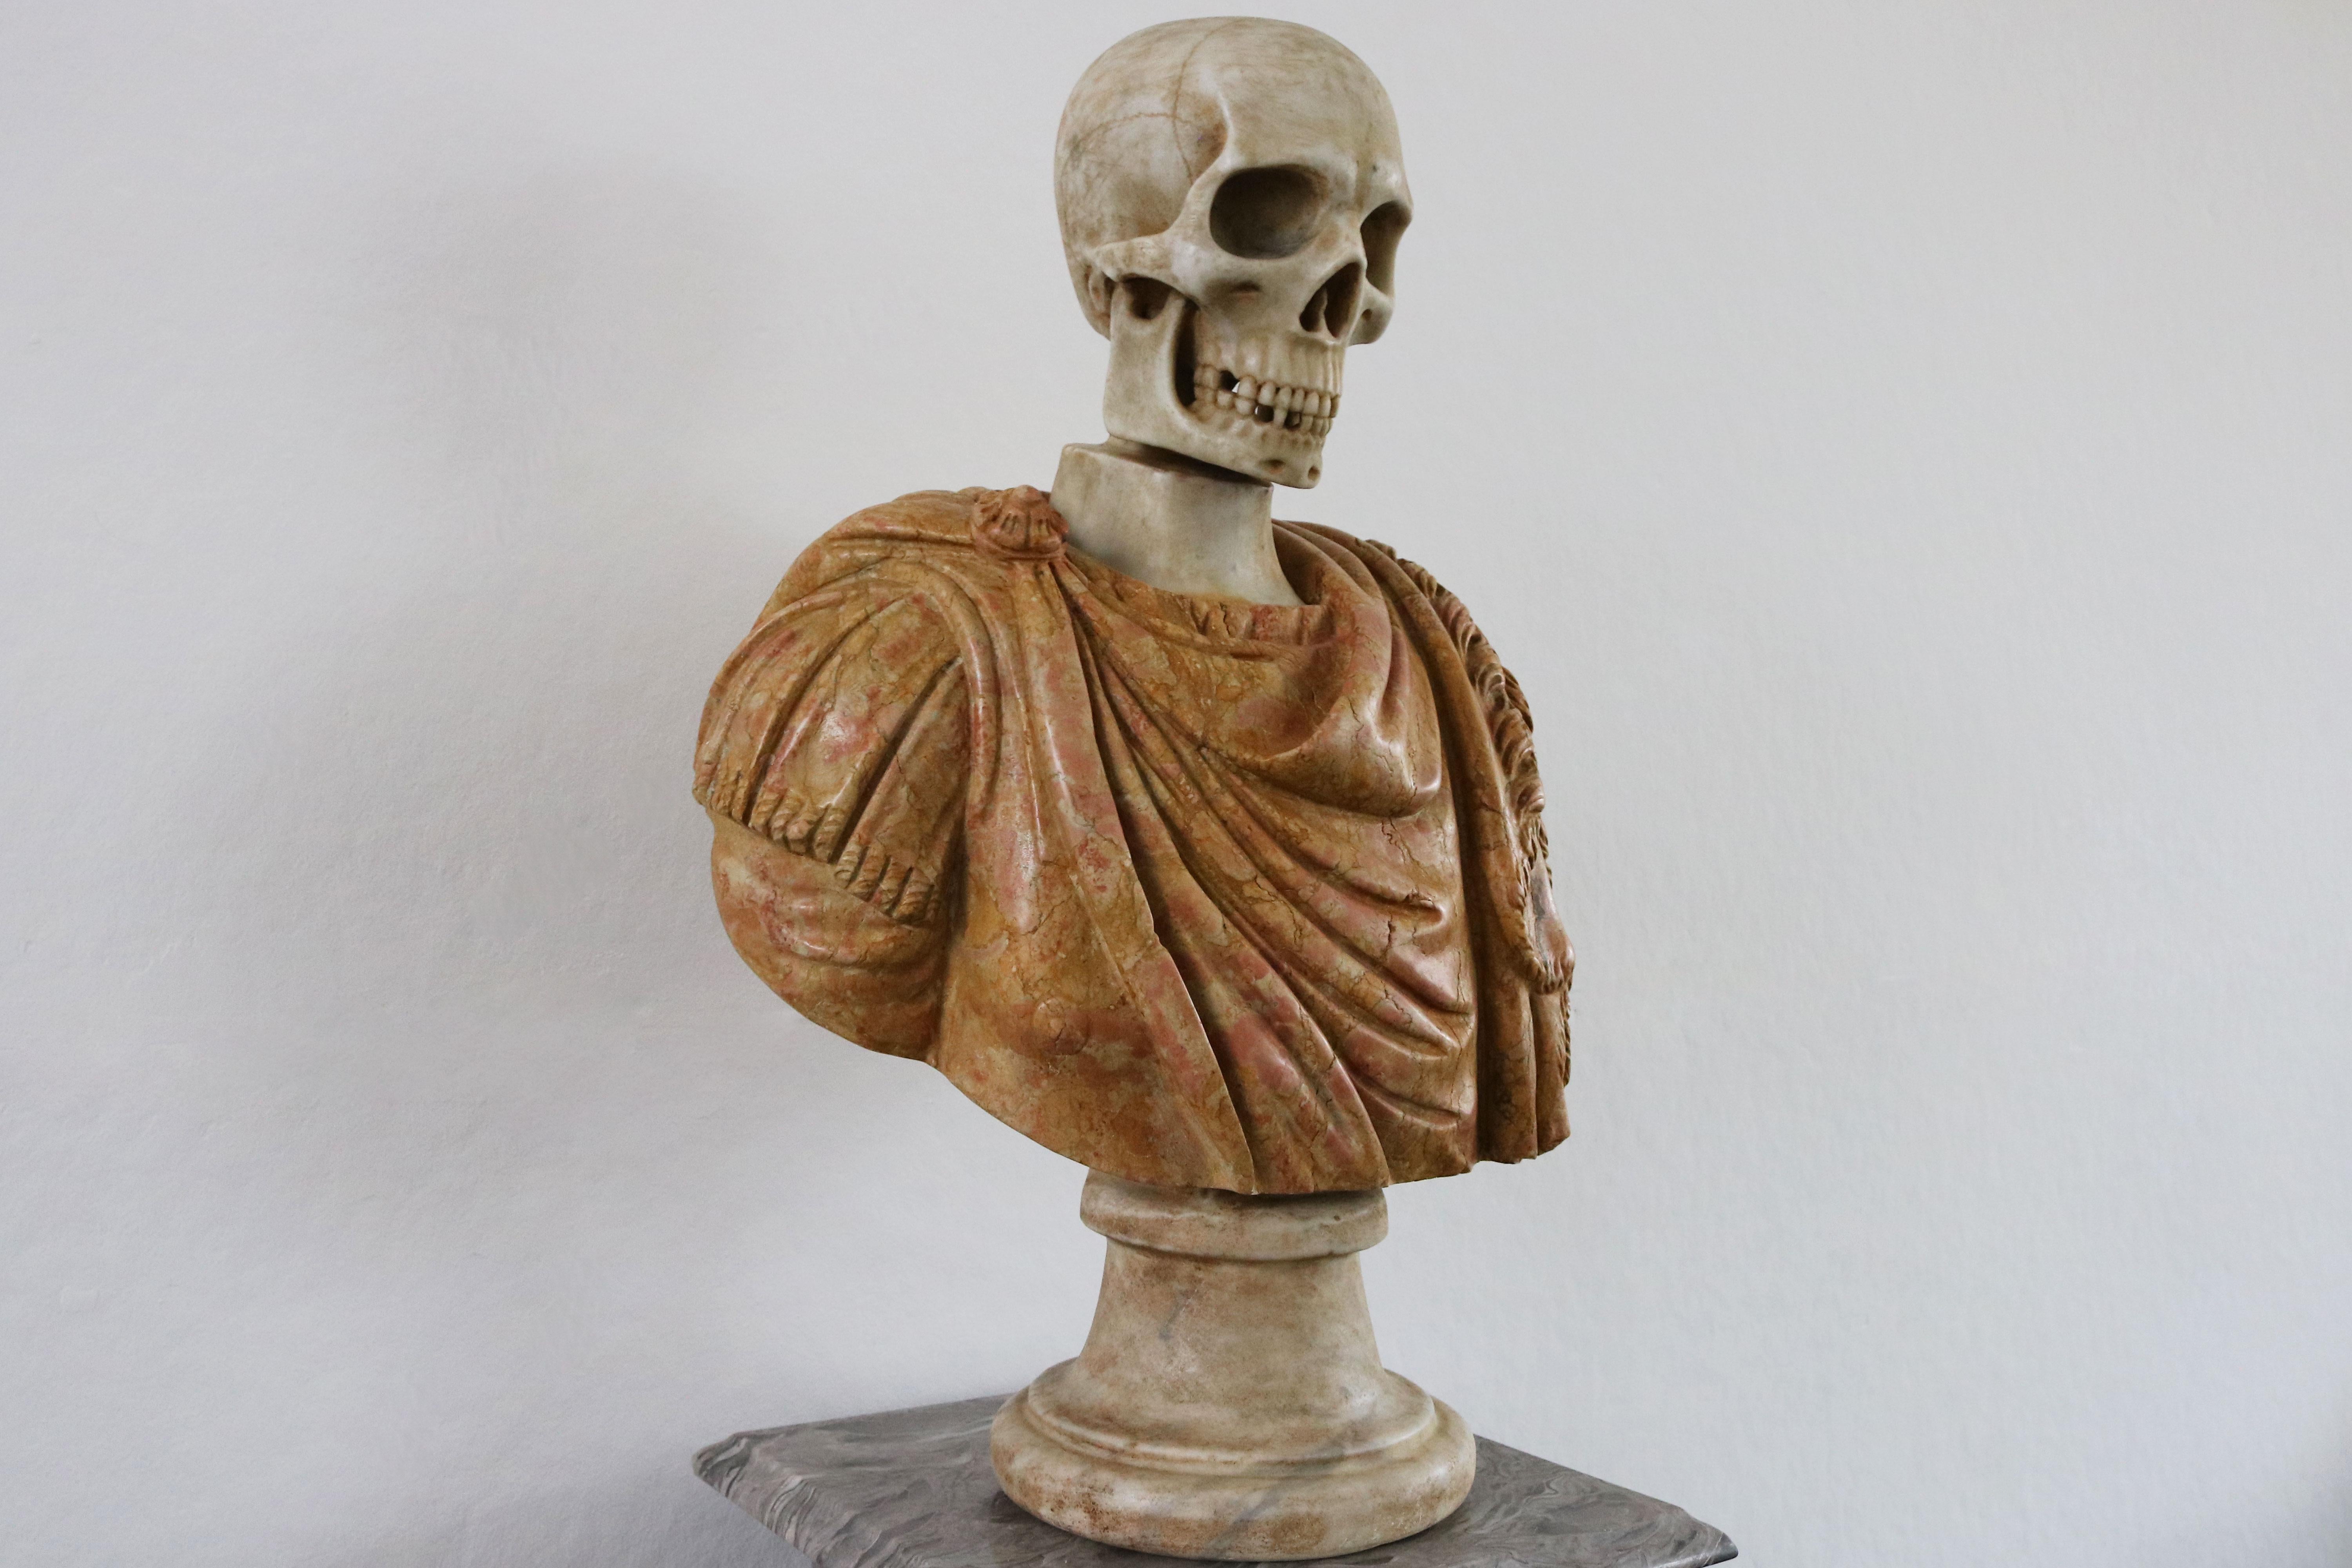 Masterfully carved Italian Vanitas bust in solid marble from late 19th century. 
White Carrara marble skull combined with a red Rosso Imperiale marble Roman toga (robe). 
The roman toga shows gorgeous detail like curves / folds in the fabric & a